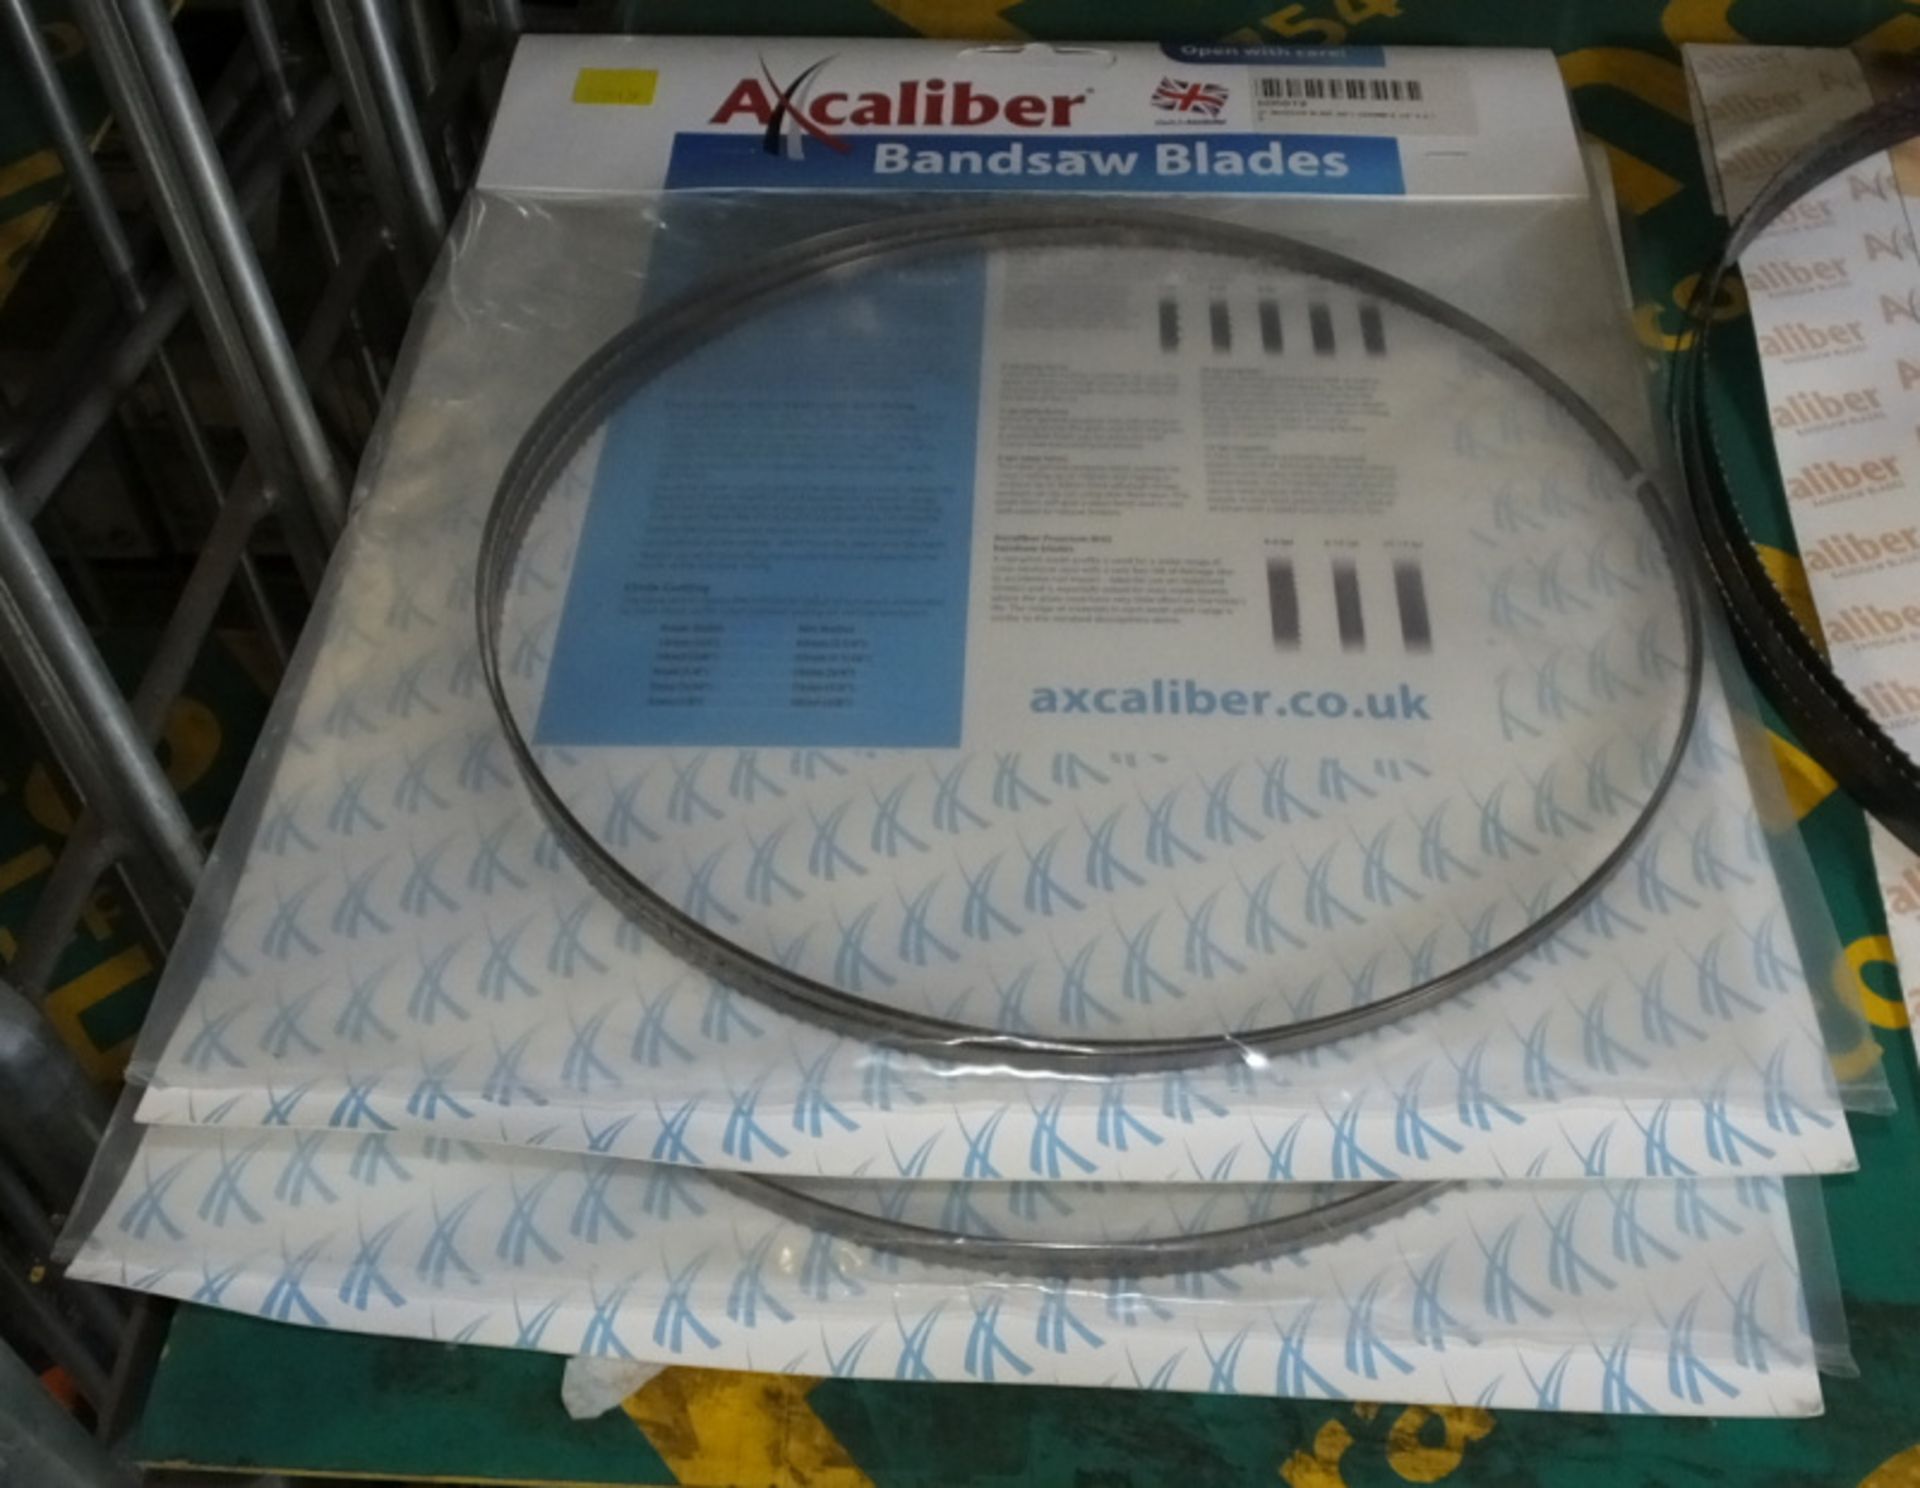 6x Axcaliber Various Sized Bandsaw Blades - Image 4 of 4